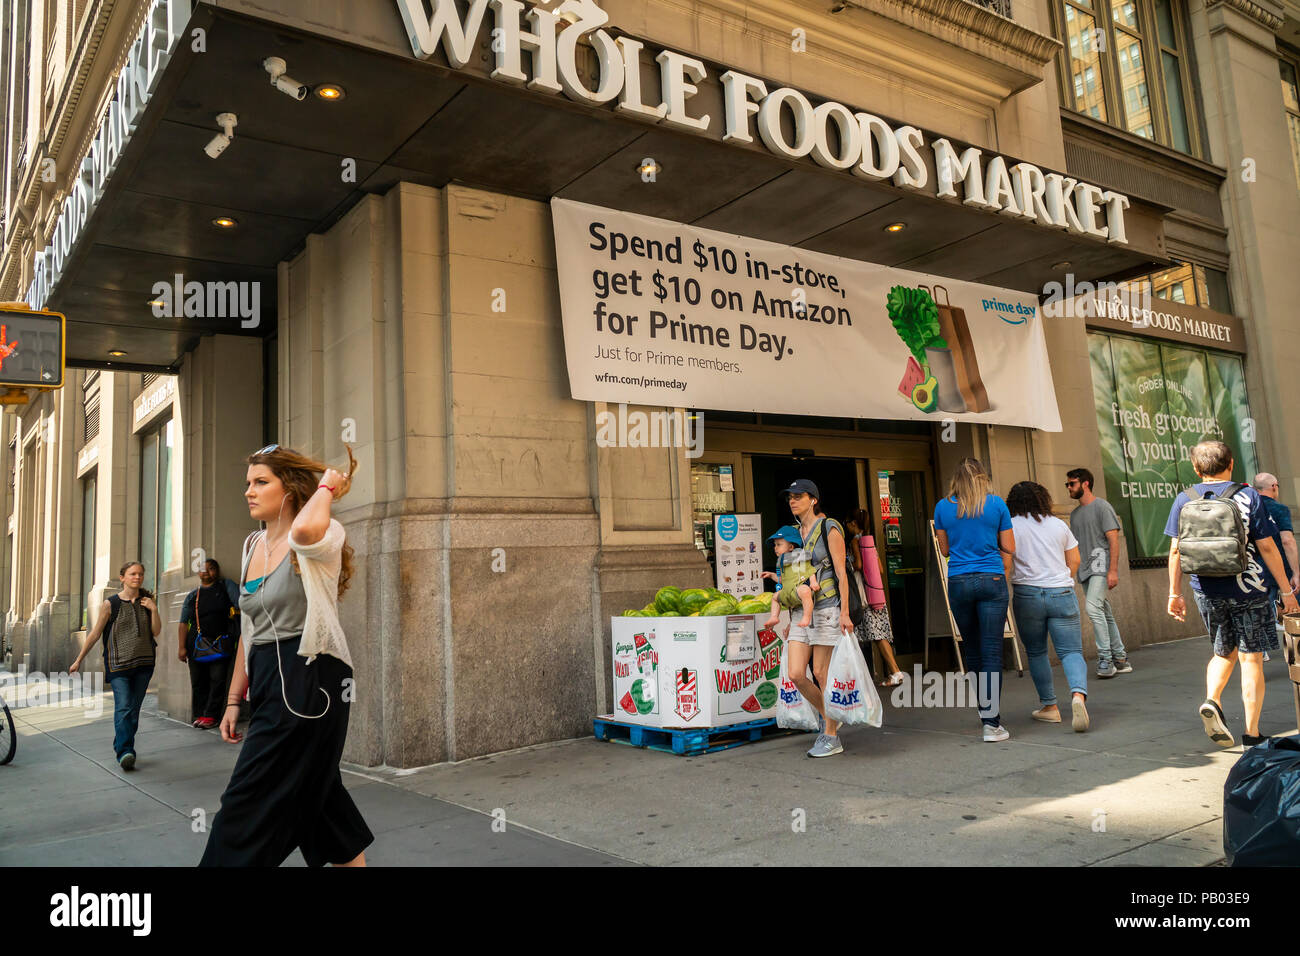 The Whole Foods Market in the Chelsea neighborhood of New York advertises Amazon's offer to Prime members of $10 off on Prime Day when you spend $10 in store. Amazon's self-proclaimed holiday starts on July 16. (Â© Richard B. Levine) Stock Photo